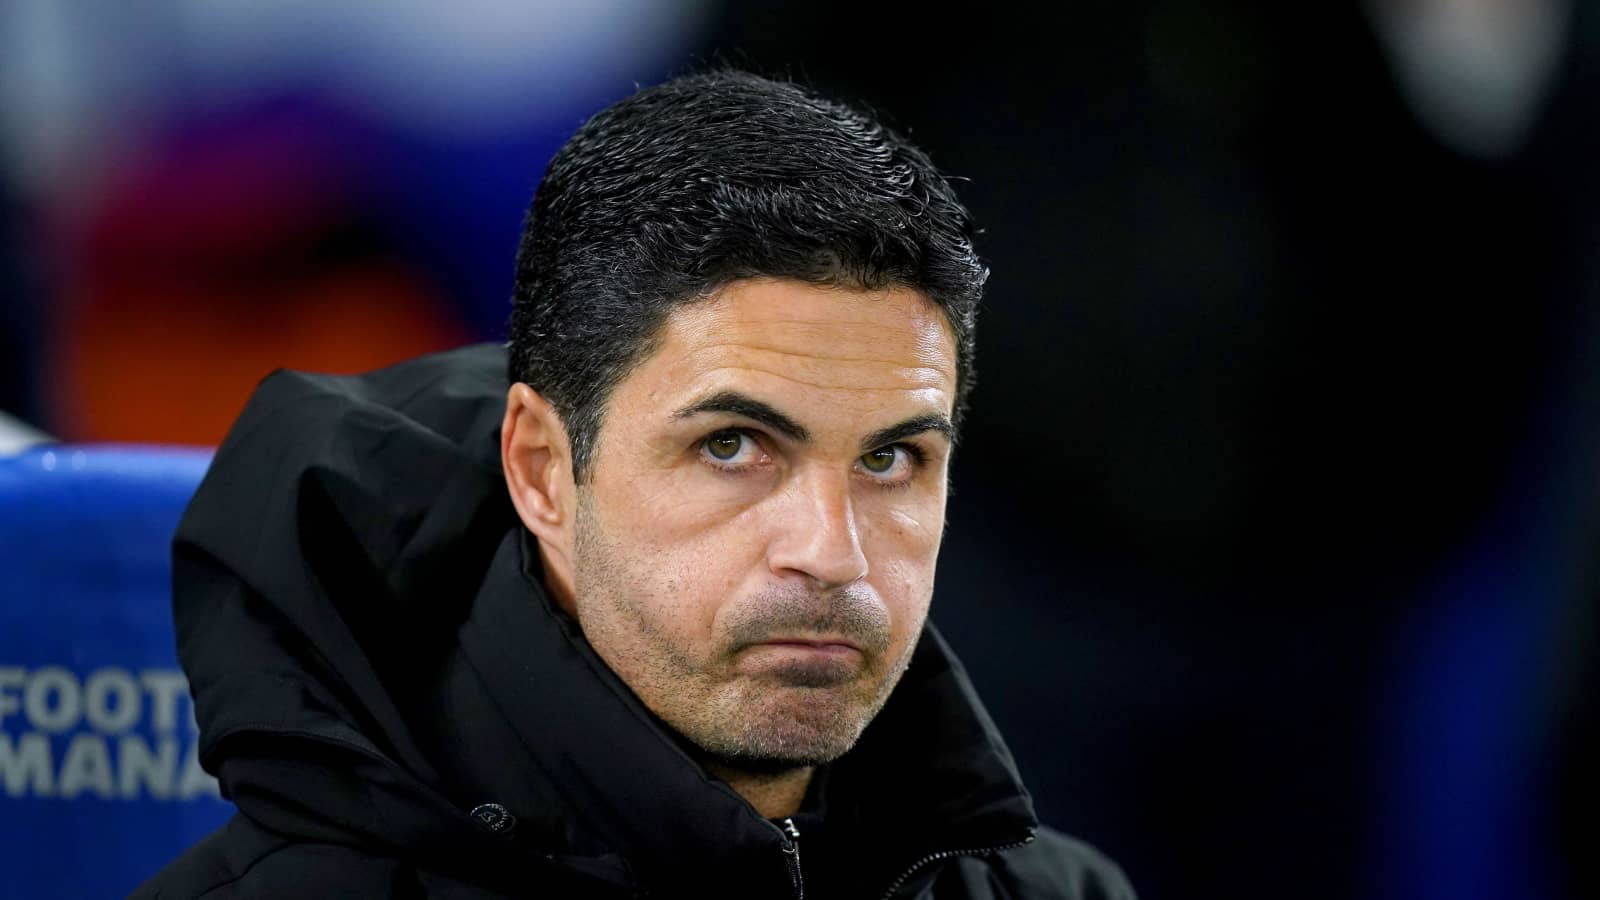 Arsenal Will Complete These Deals; Arteta Receive £27.4m More